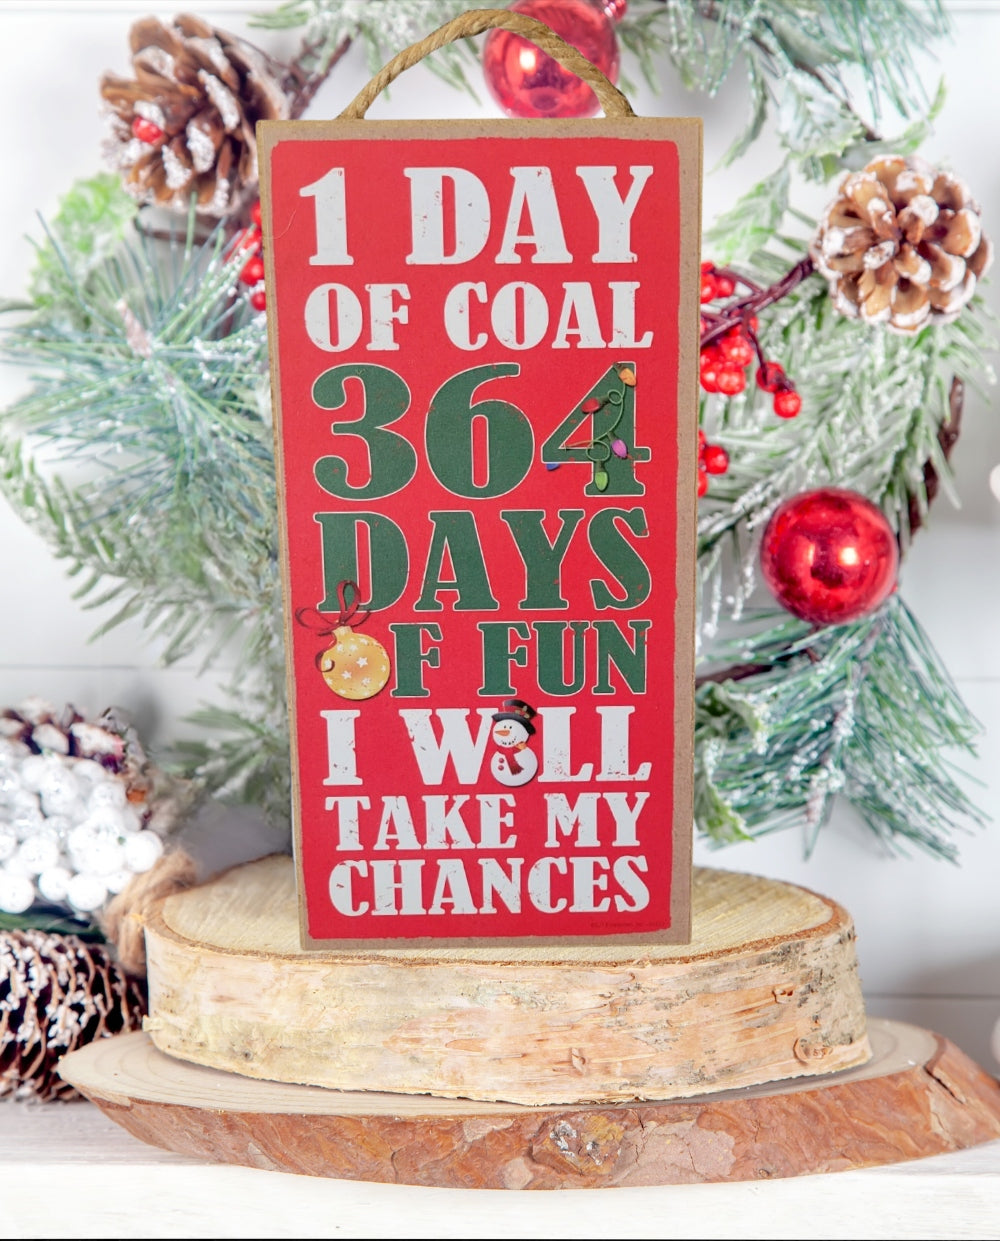 1 Day of Coal 364 Days of Fun - I Will Take My Chances Holiday Sign